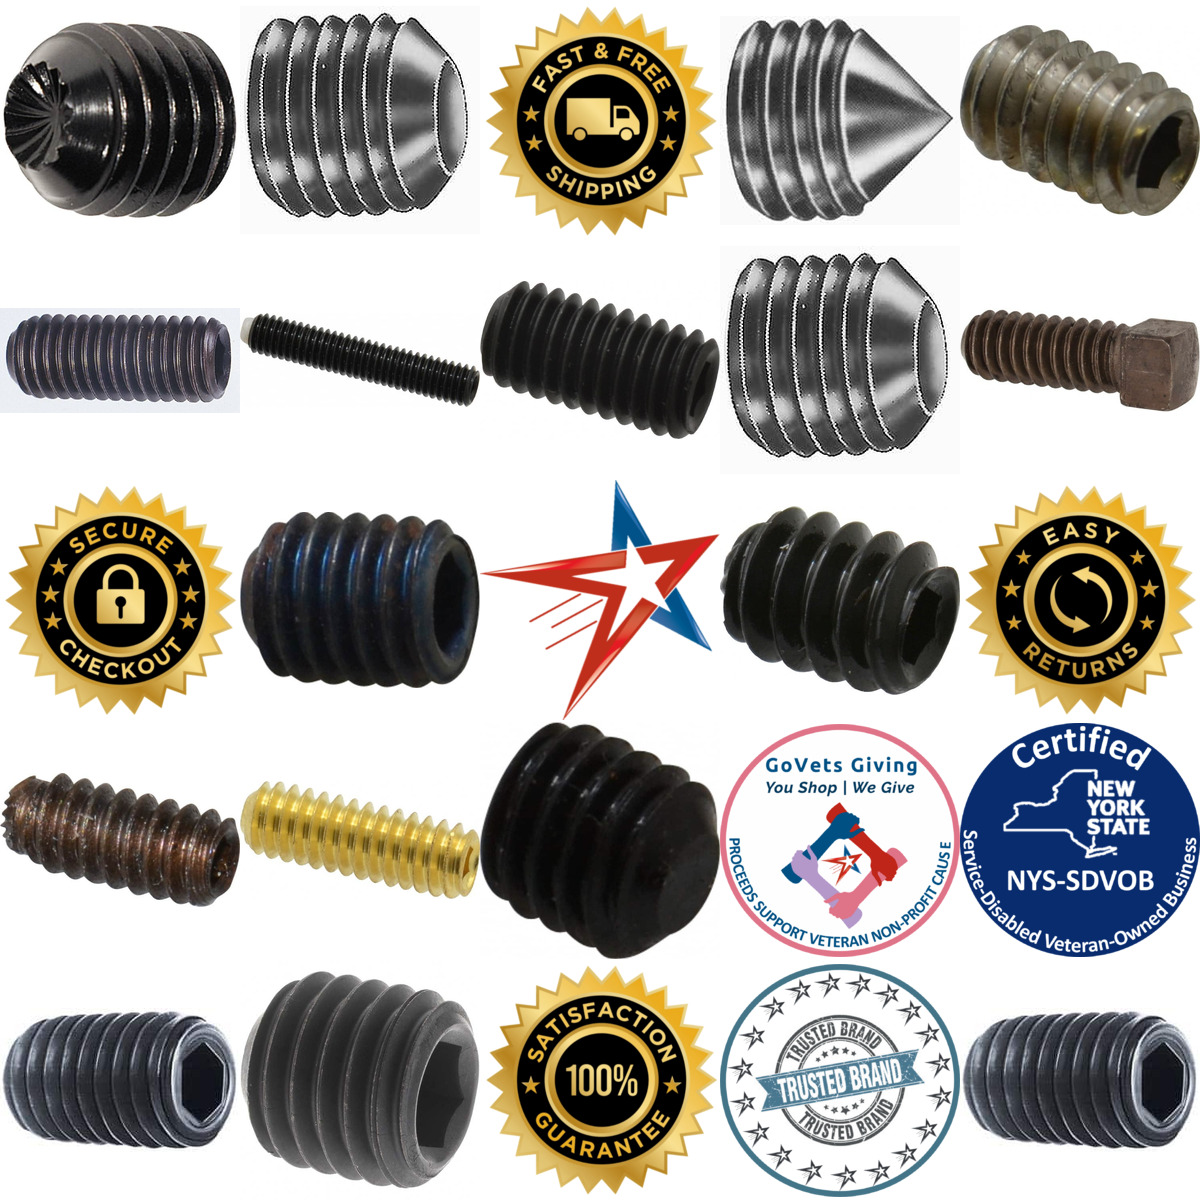 A selection of Set Screws products on GoVets